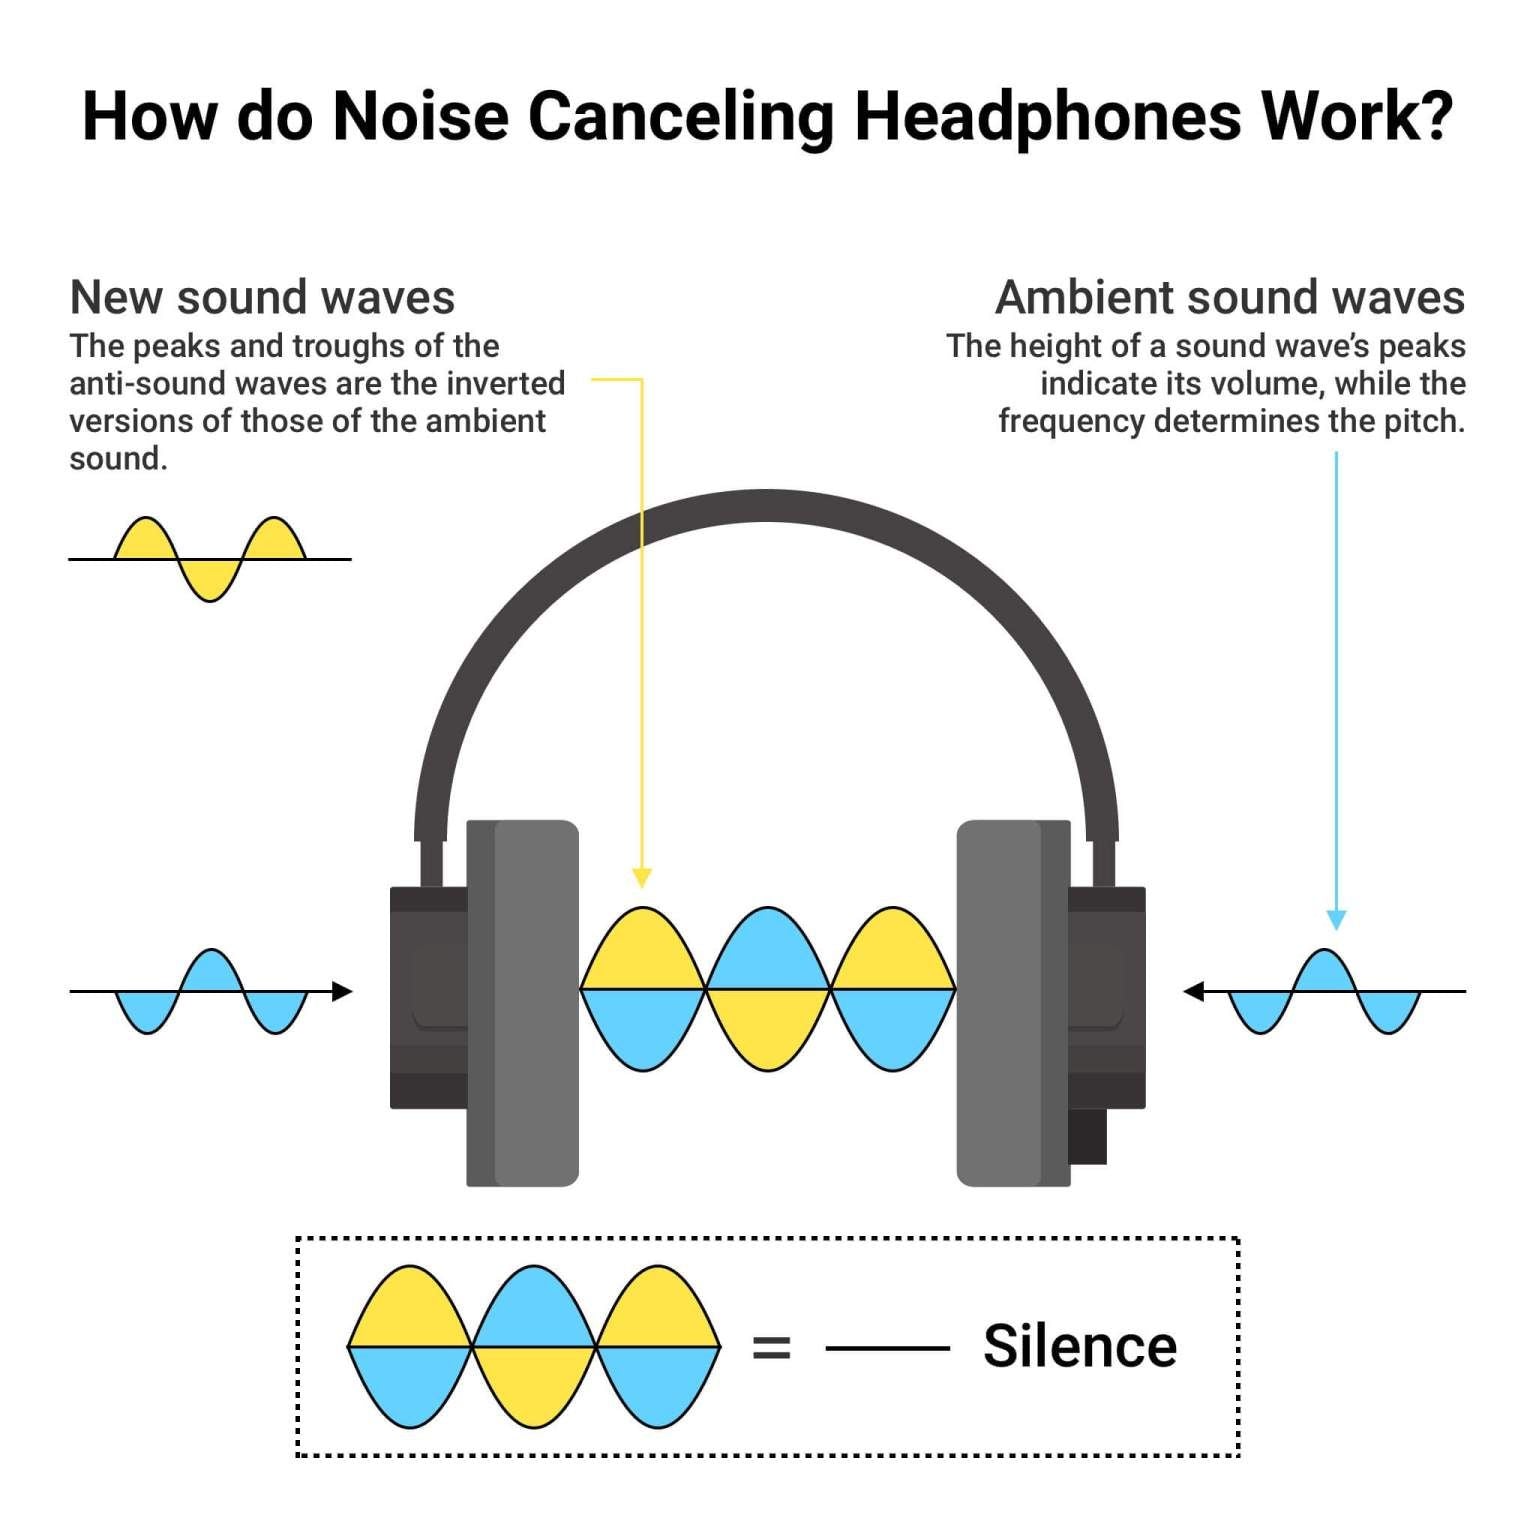 How Does Noise Cancelling Work?